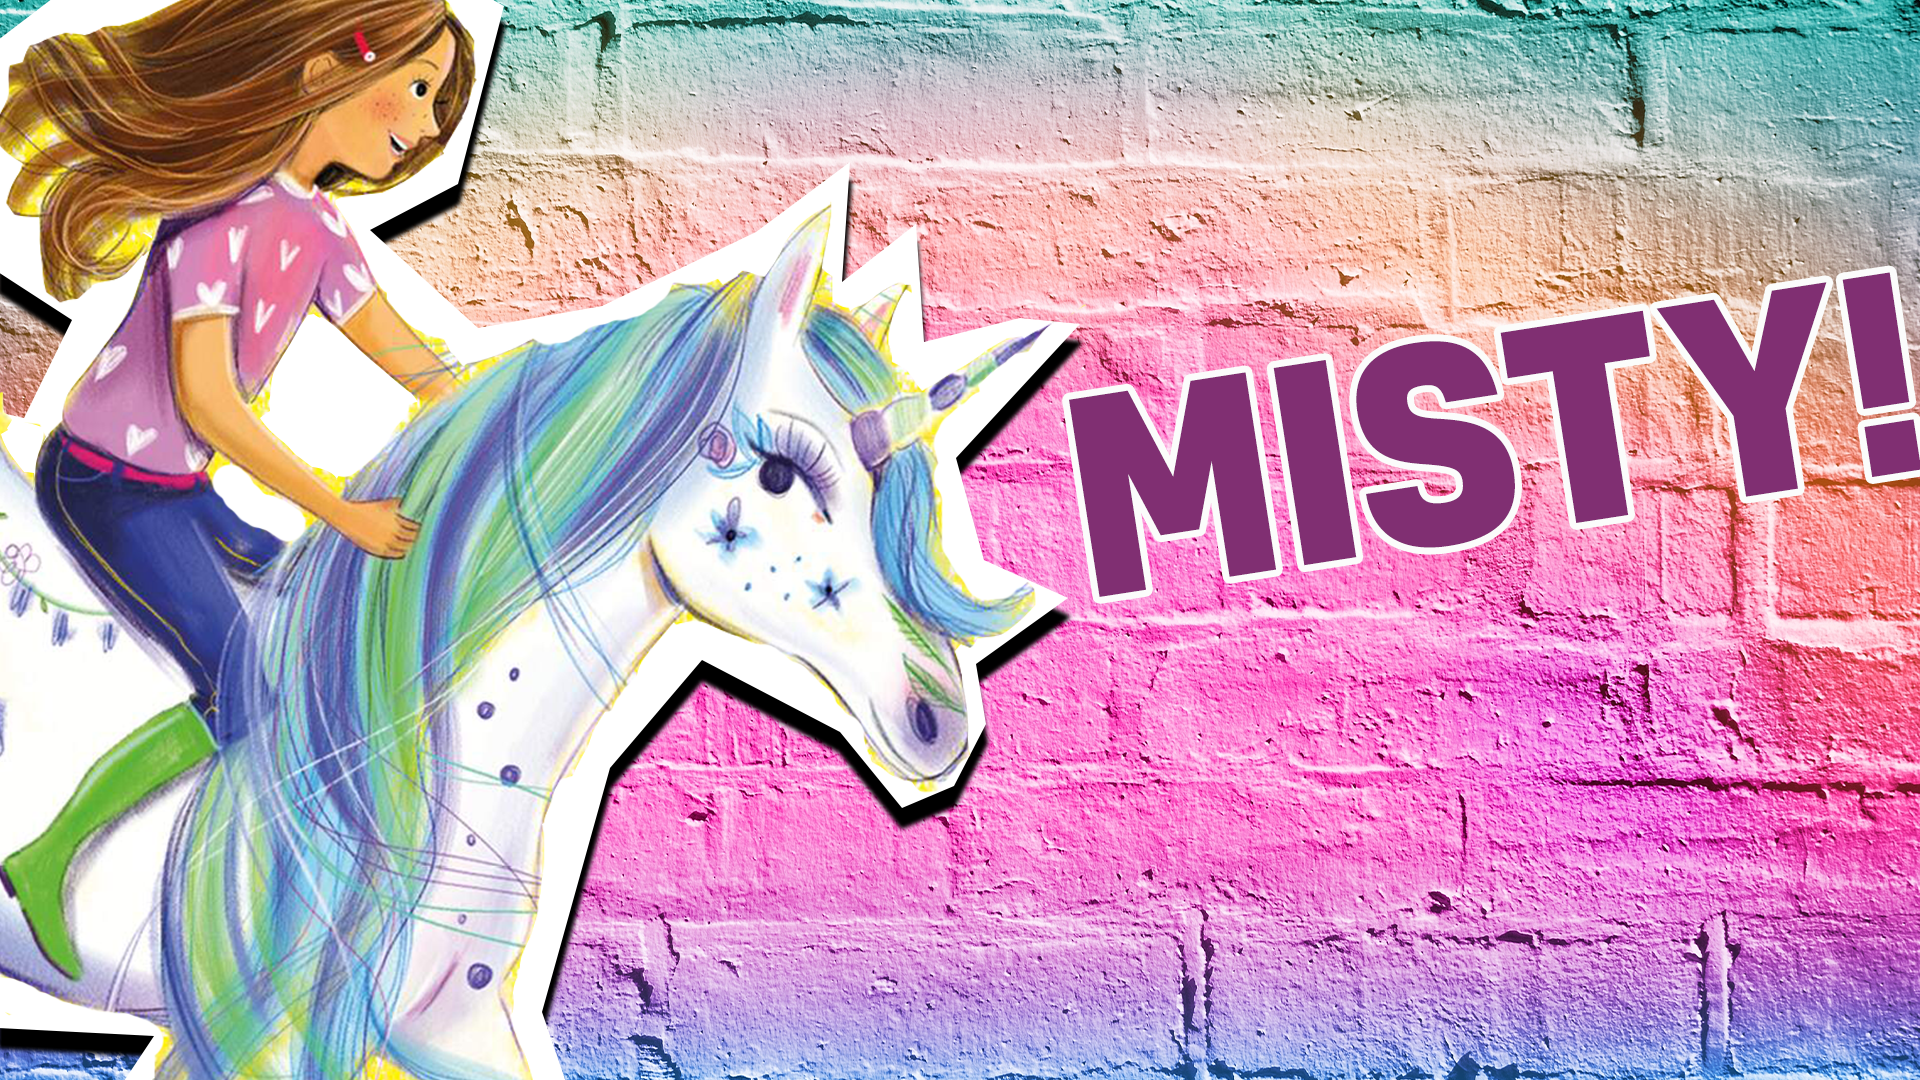 You're most like Misty, Lyra's unicorn! You're always ready for adventure, and you're not scared of anything!